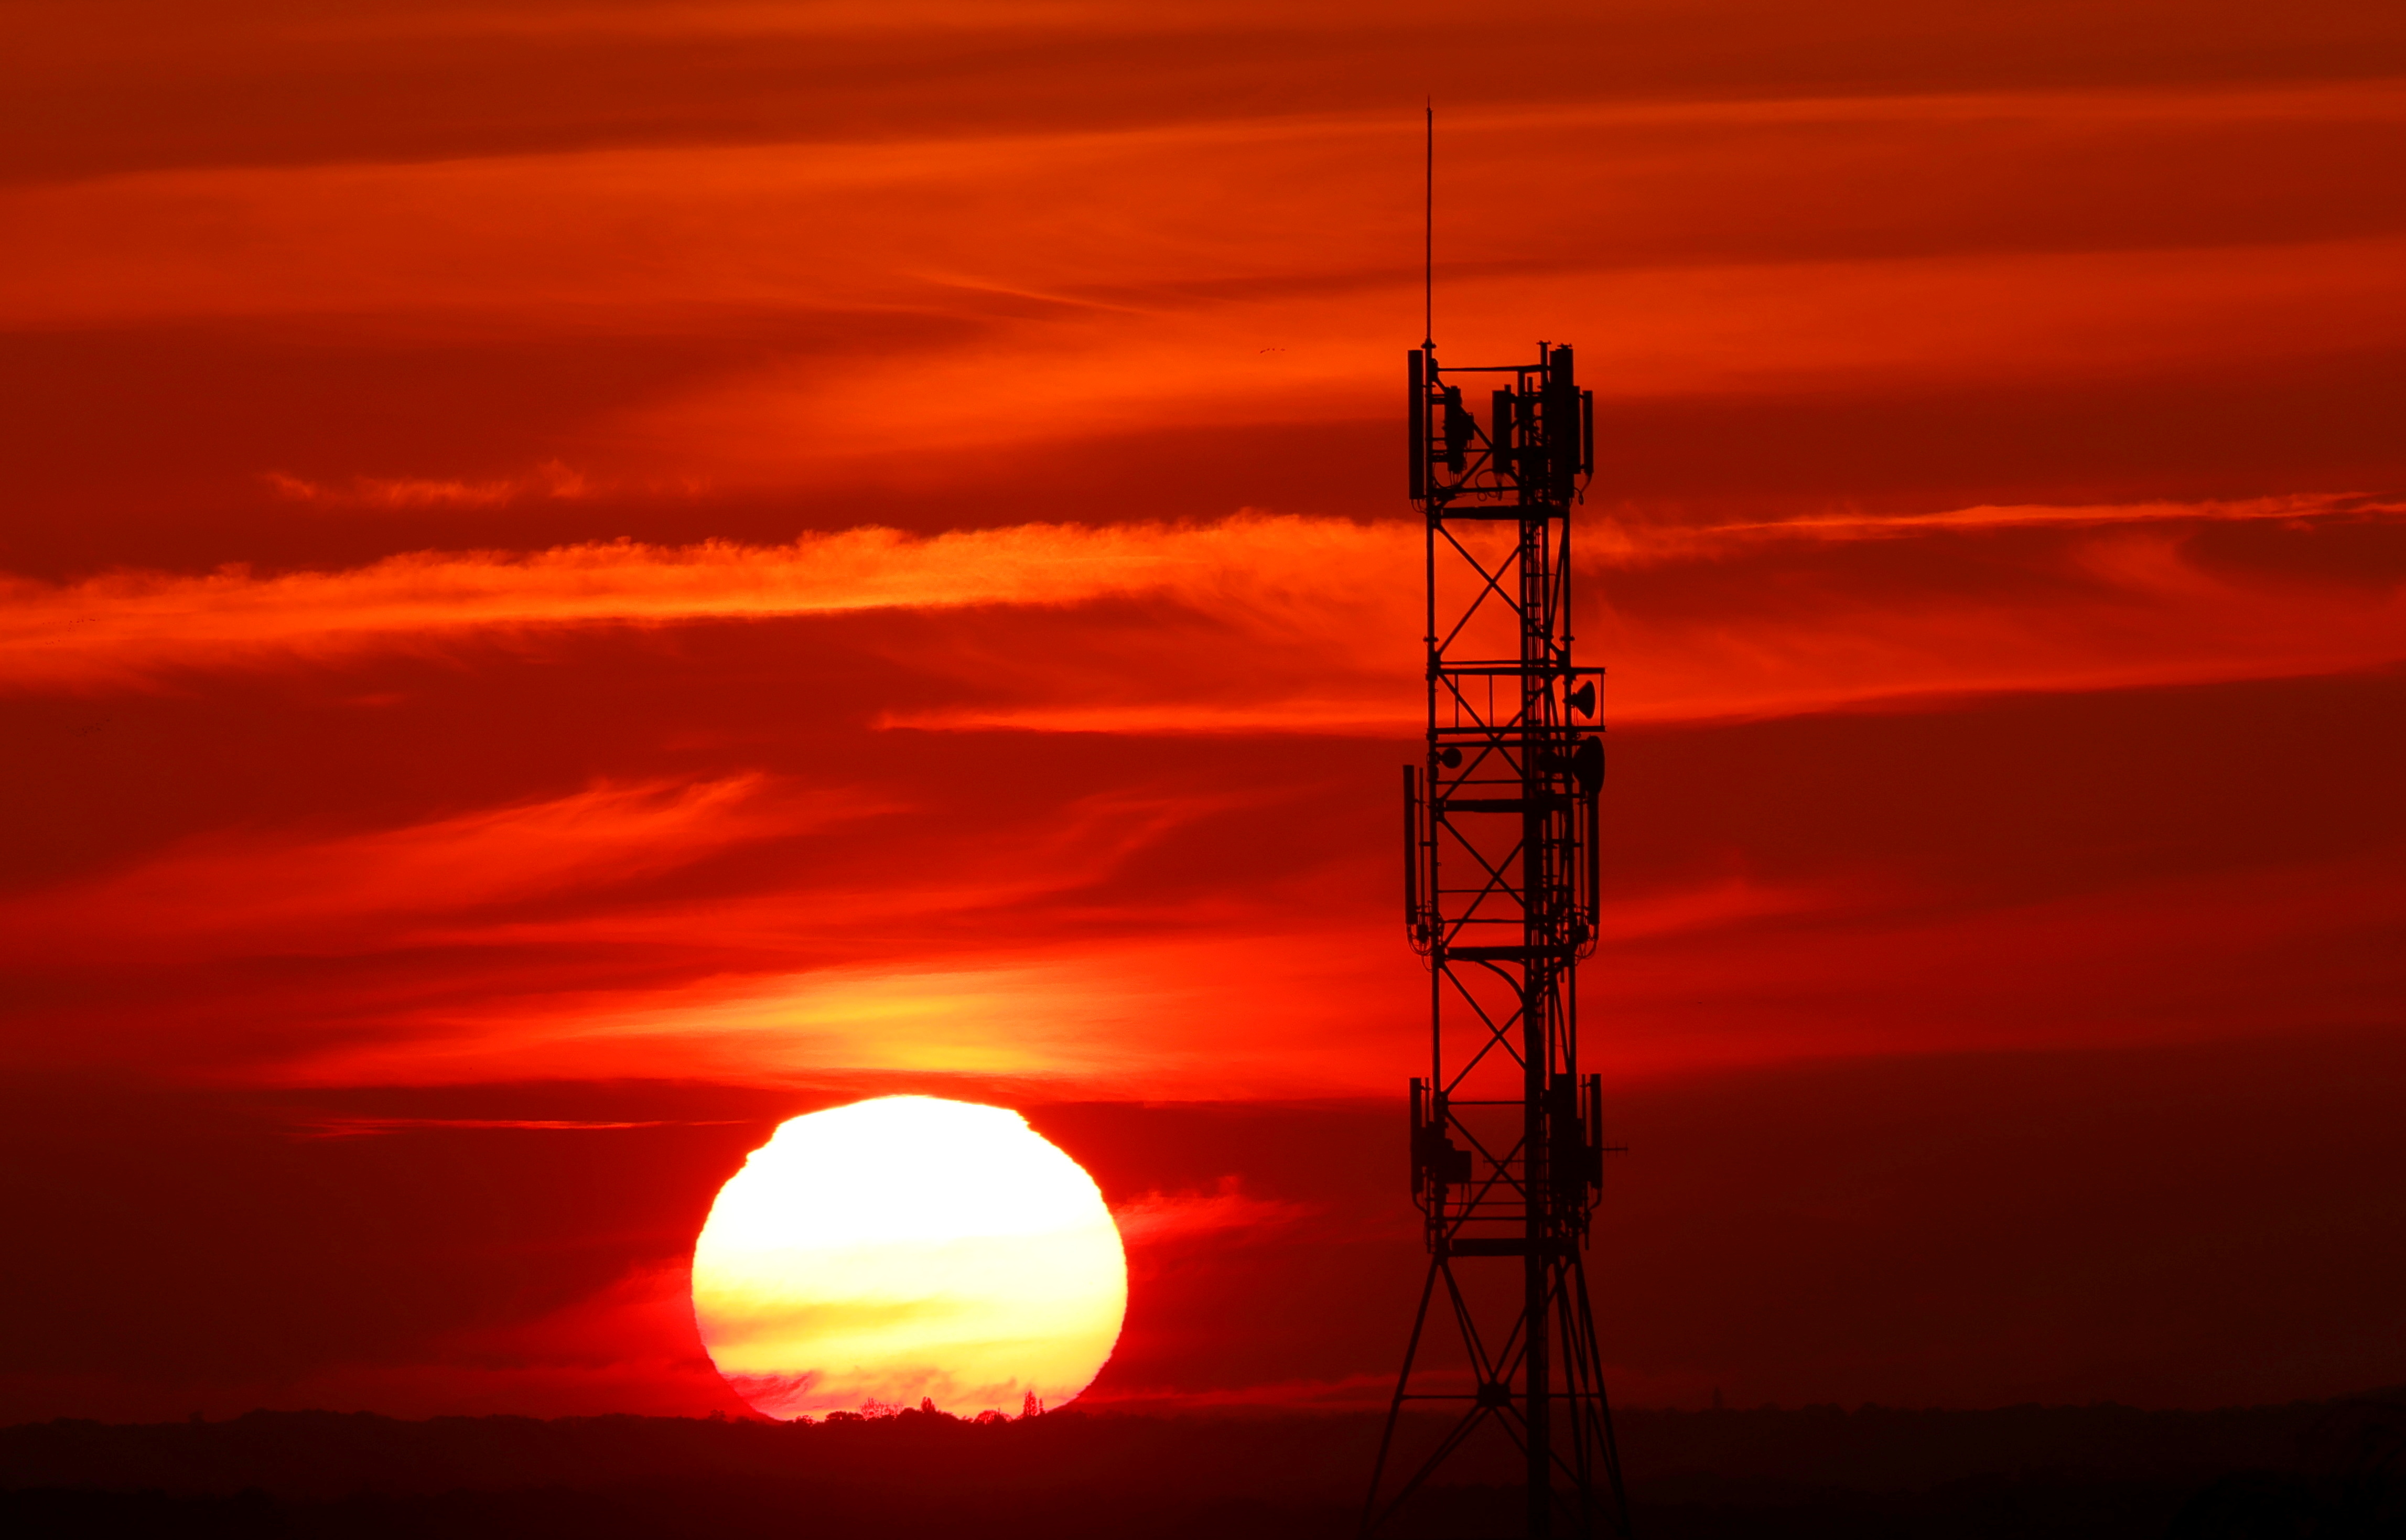 The sun sets behind transmitting antennas on a mobile-phone network relay mast in Vertou